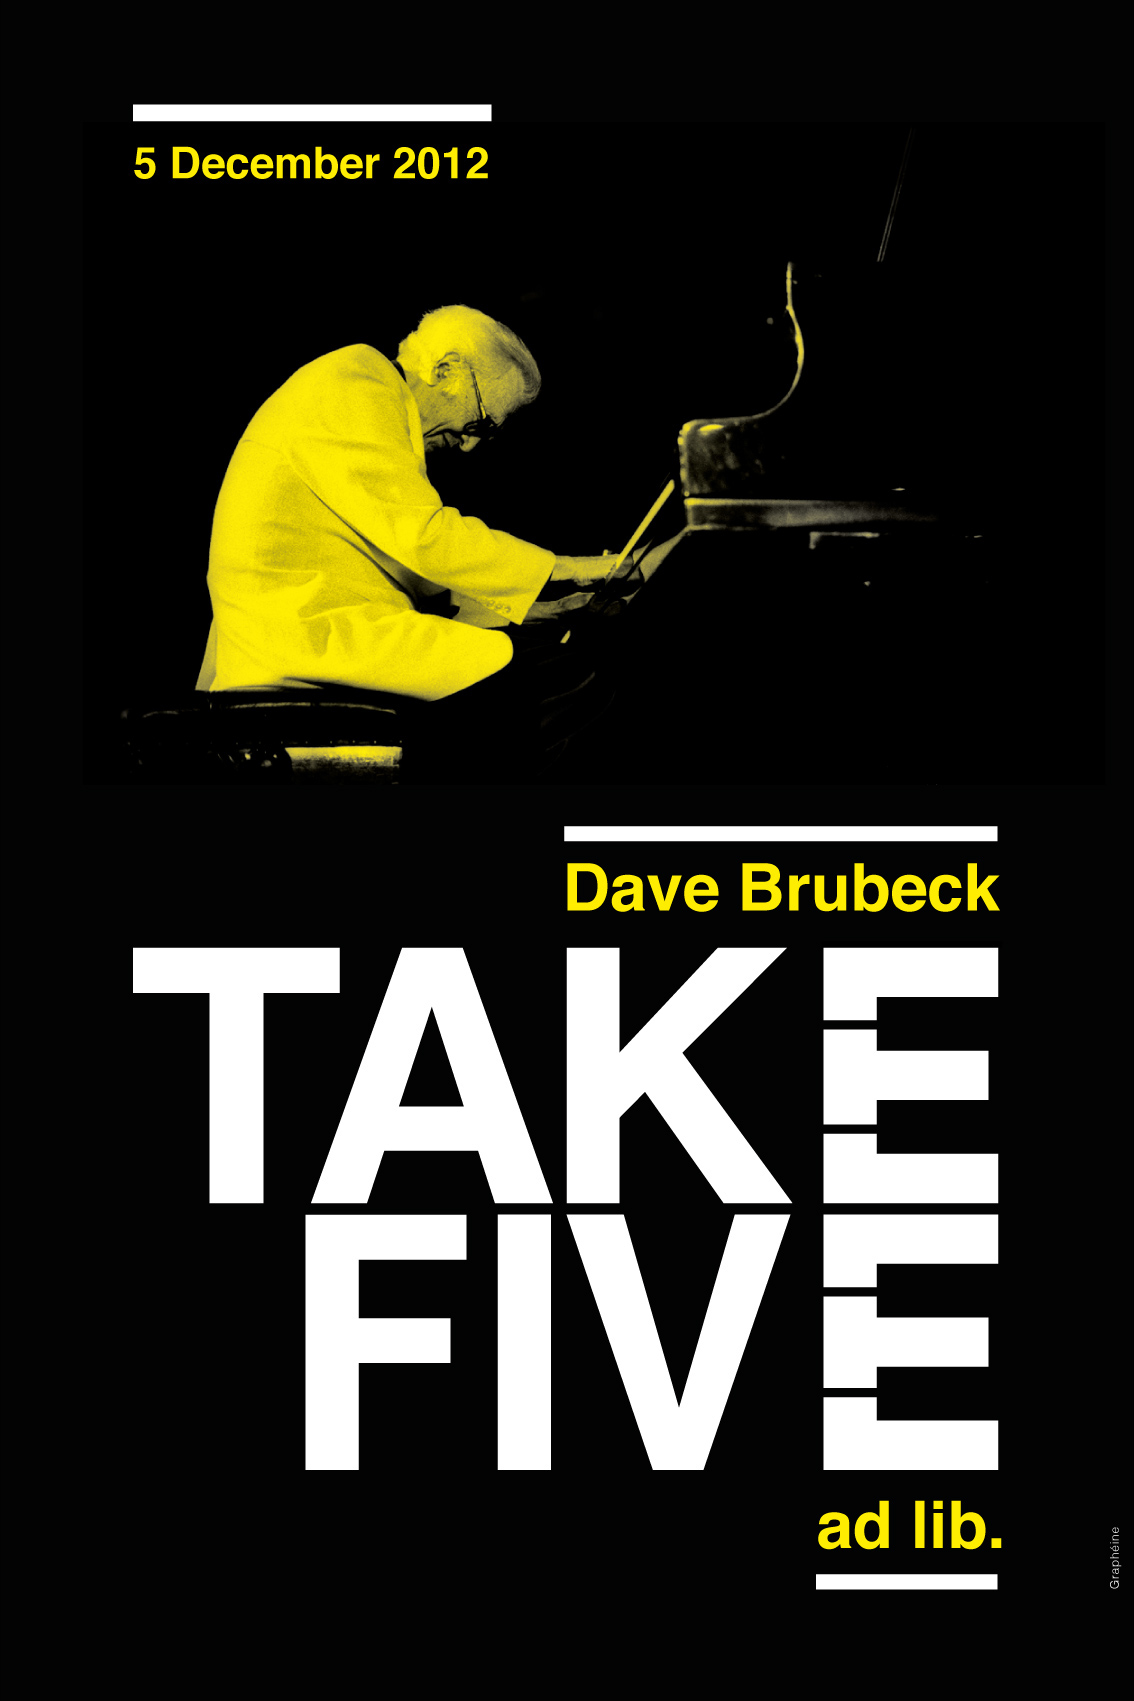 dave brubeck  typography tribute